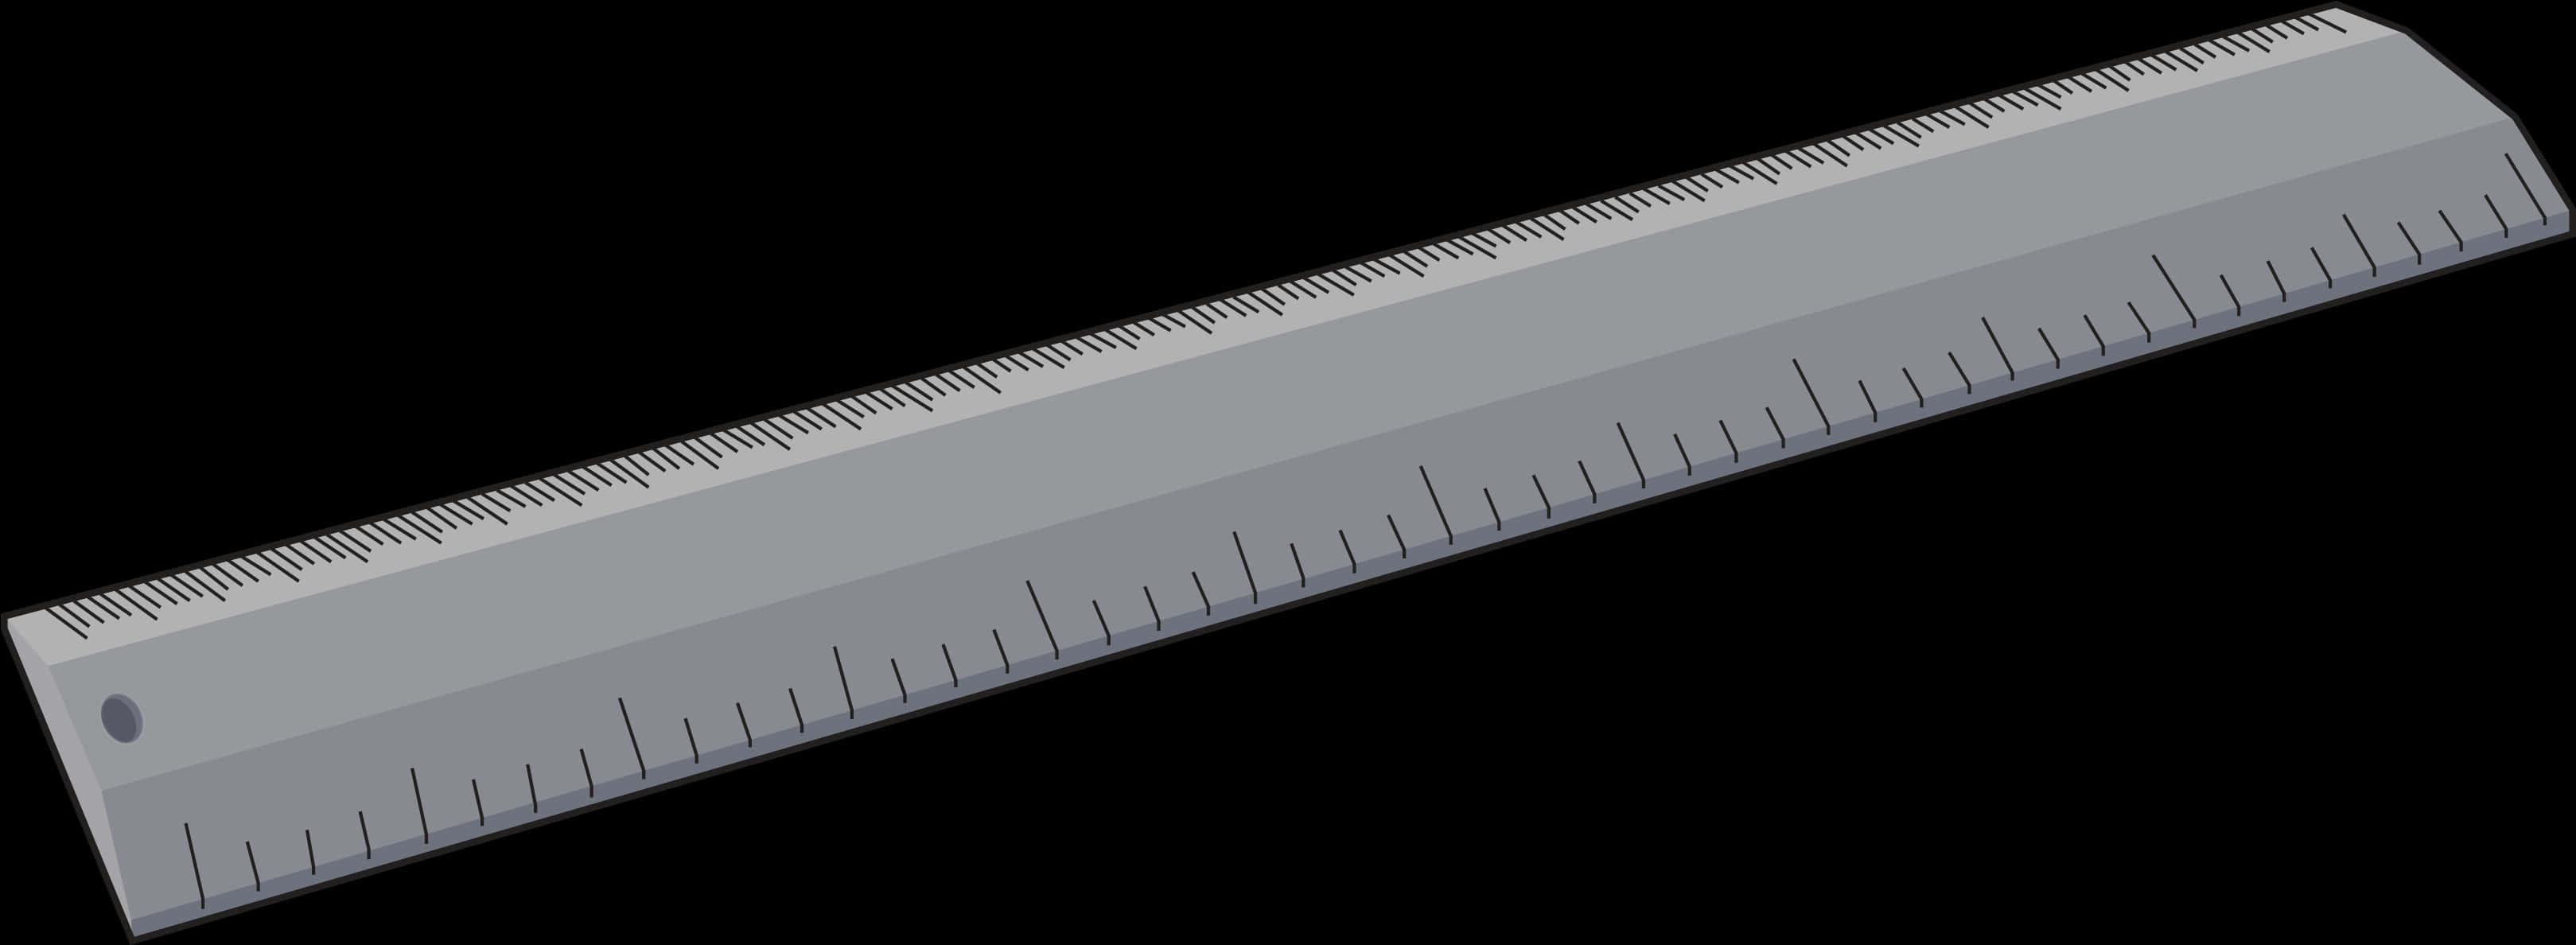 A White Ruler With Black Markings